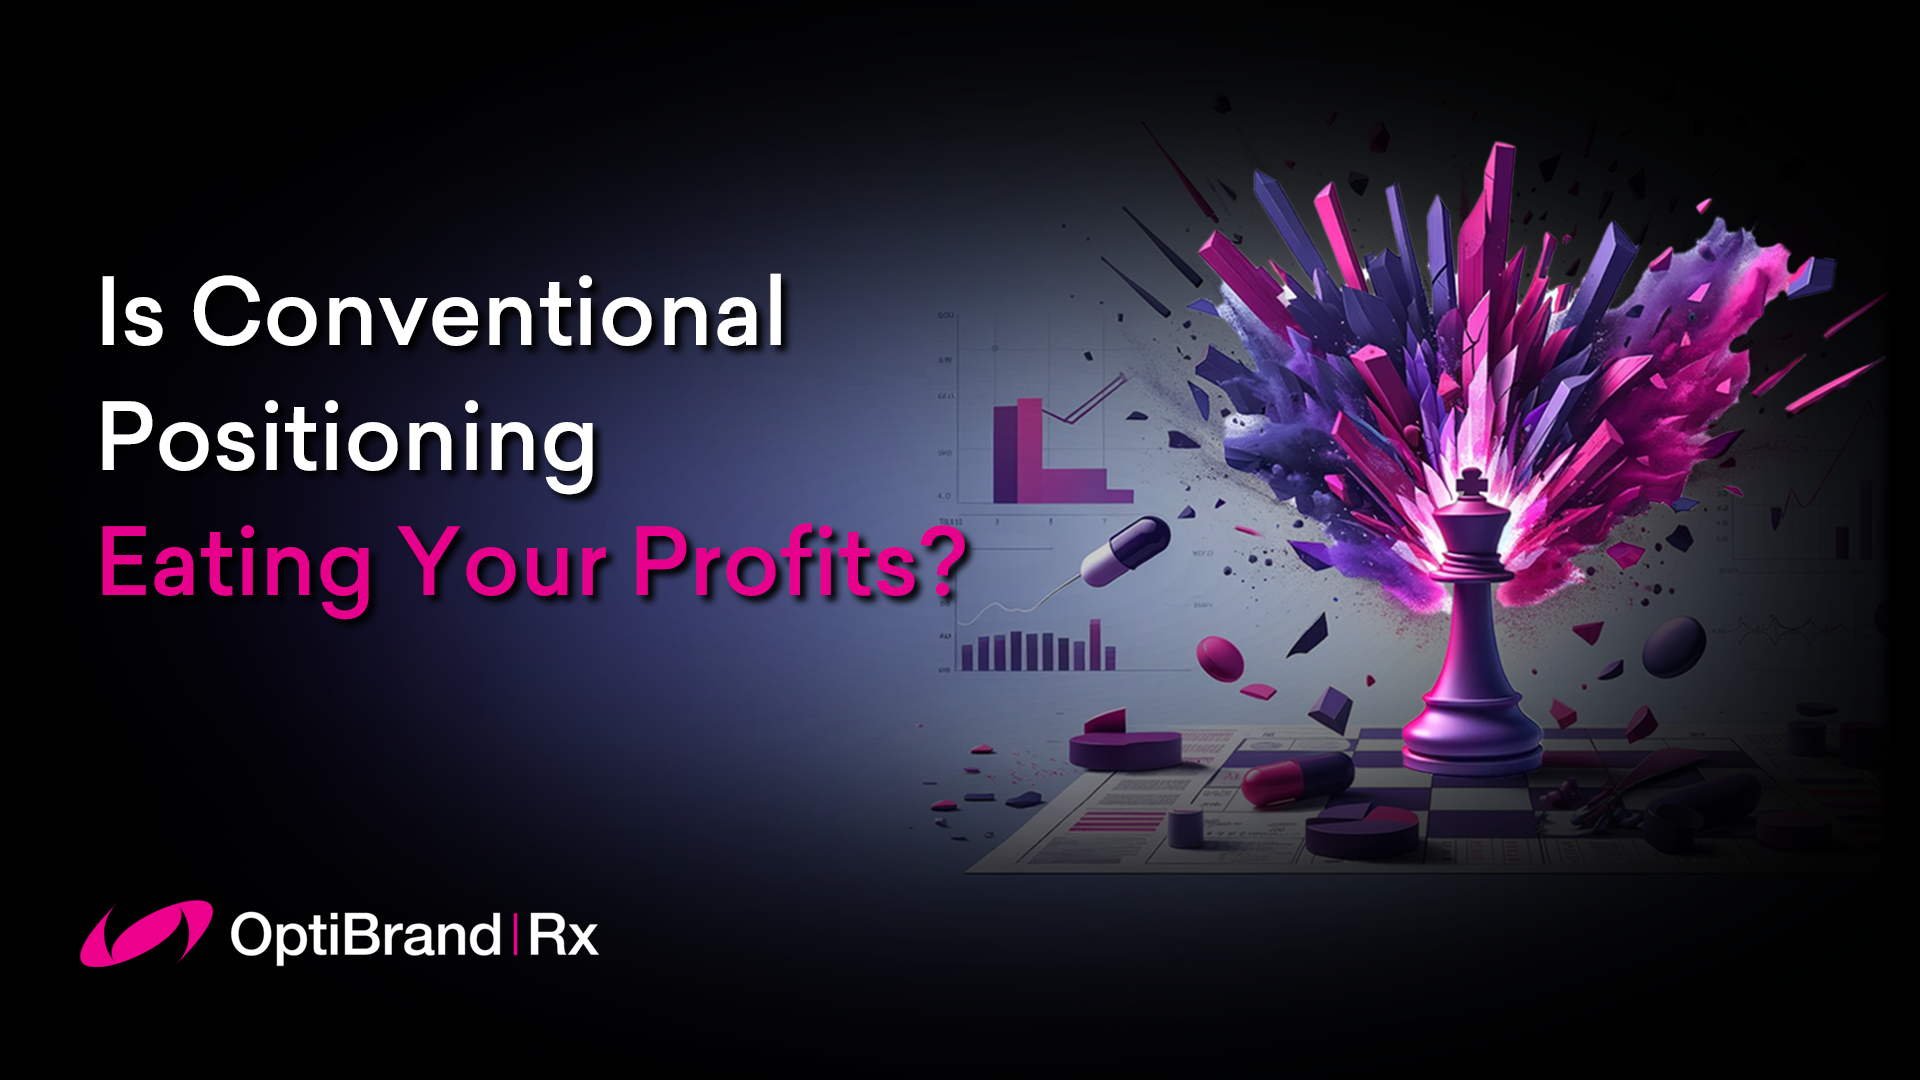 Is Conventional Positioning Eating Your Profits? OptiBrand Rx.